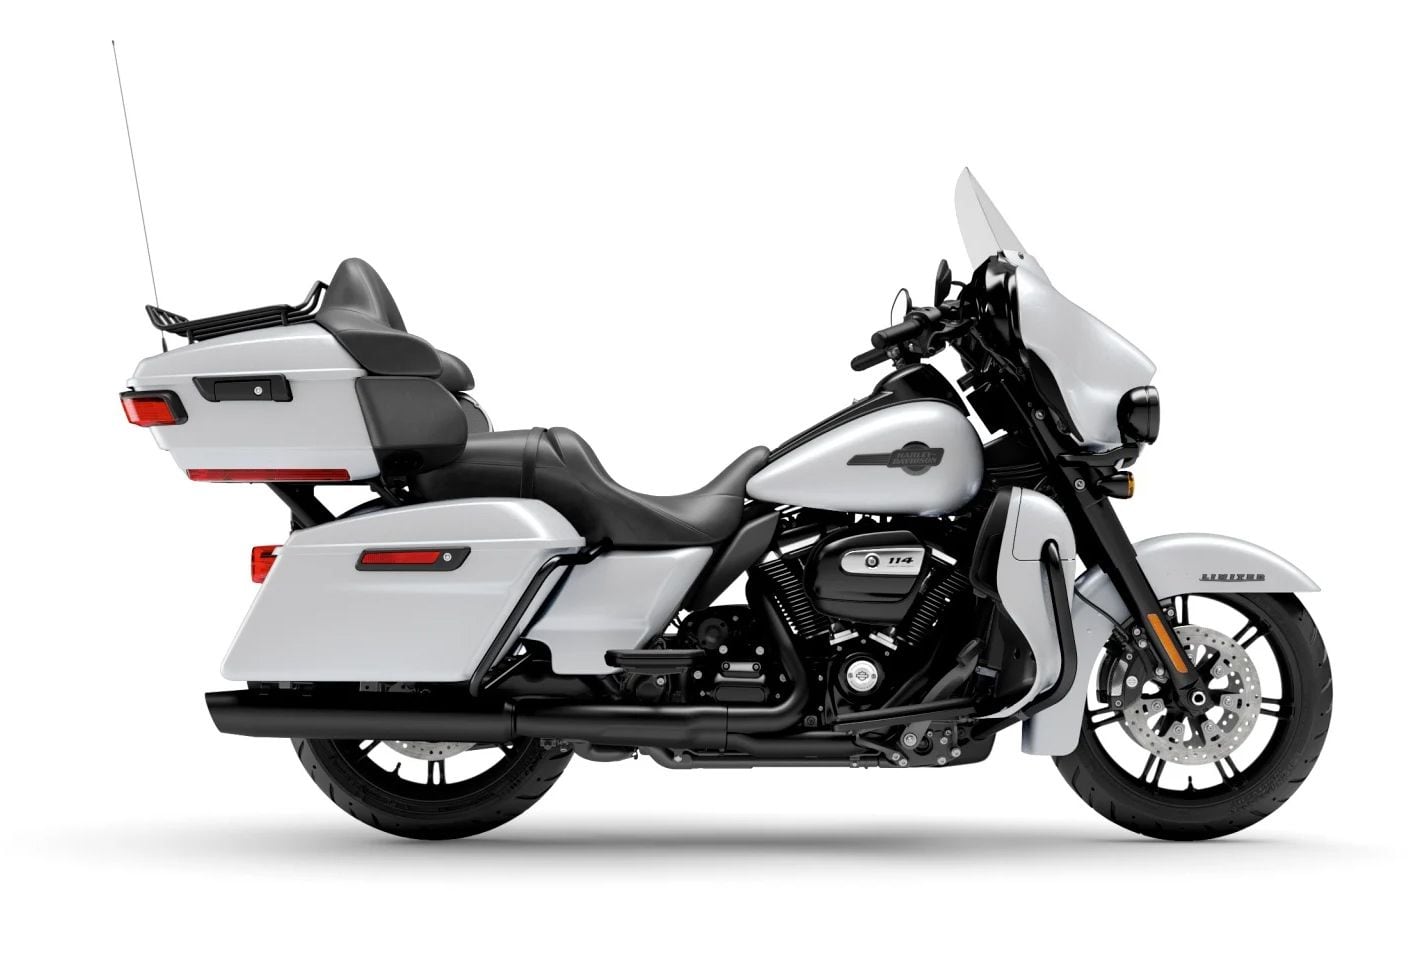 The batwing-fairinged 2024 Ultra Limited also starts at $32,499, and is available in gray, black, White Onyx Pearl (shown), Sharkskin Blue, and a two-tone red/black color scheme. Reflex Linked Brembo brakes with ABS and Tour-Pak luggage is standard.